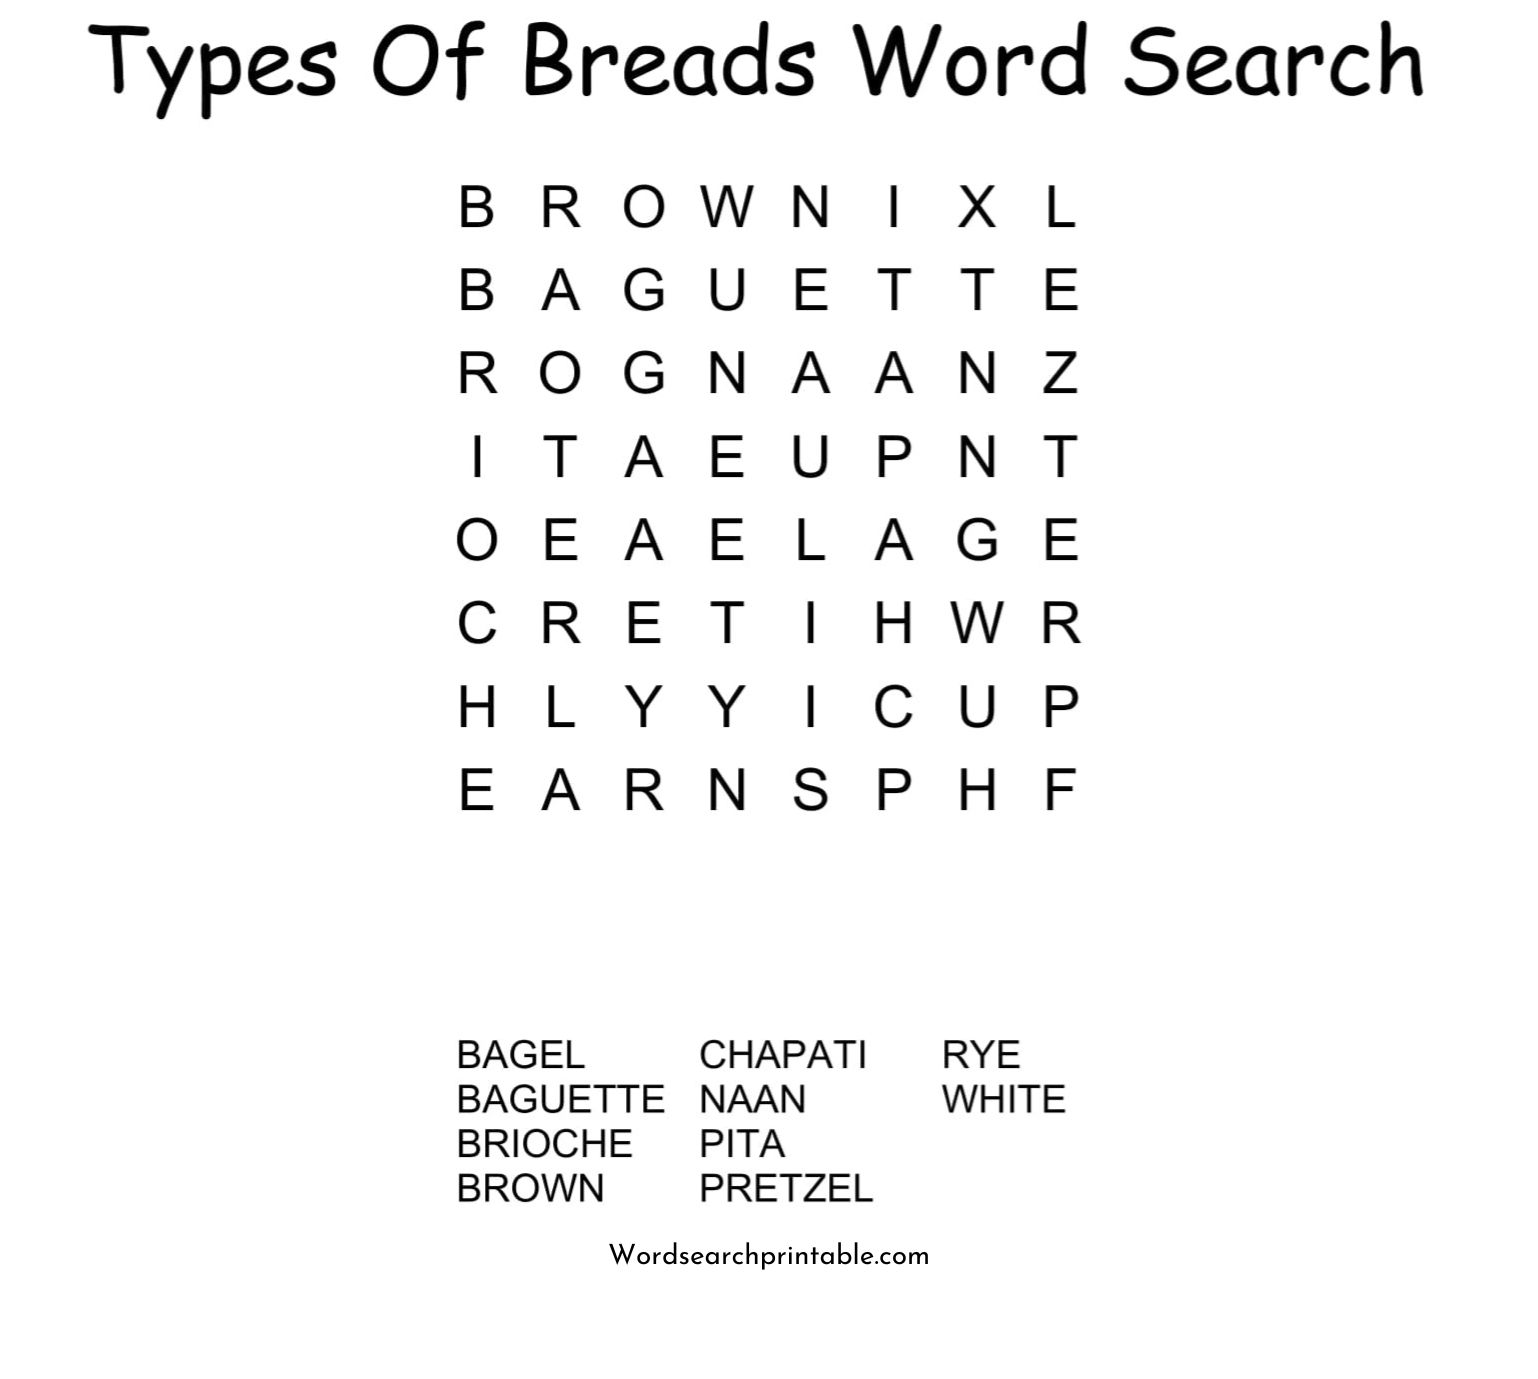 types of breads word search puzzle